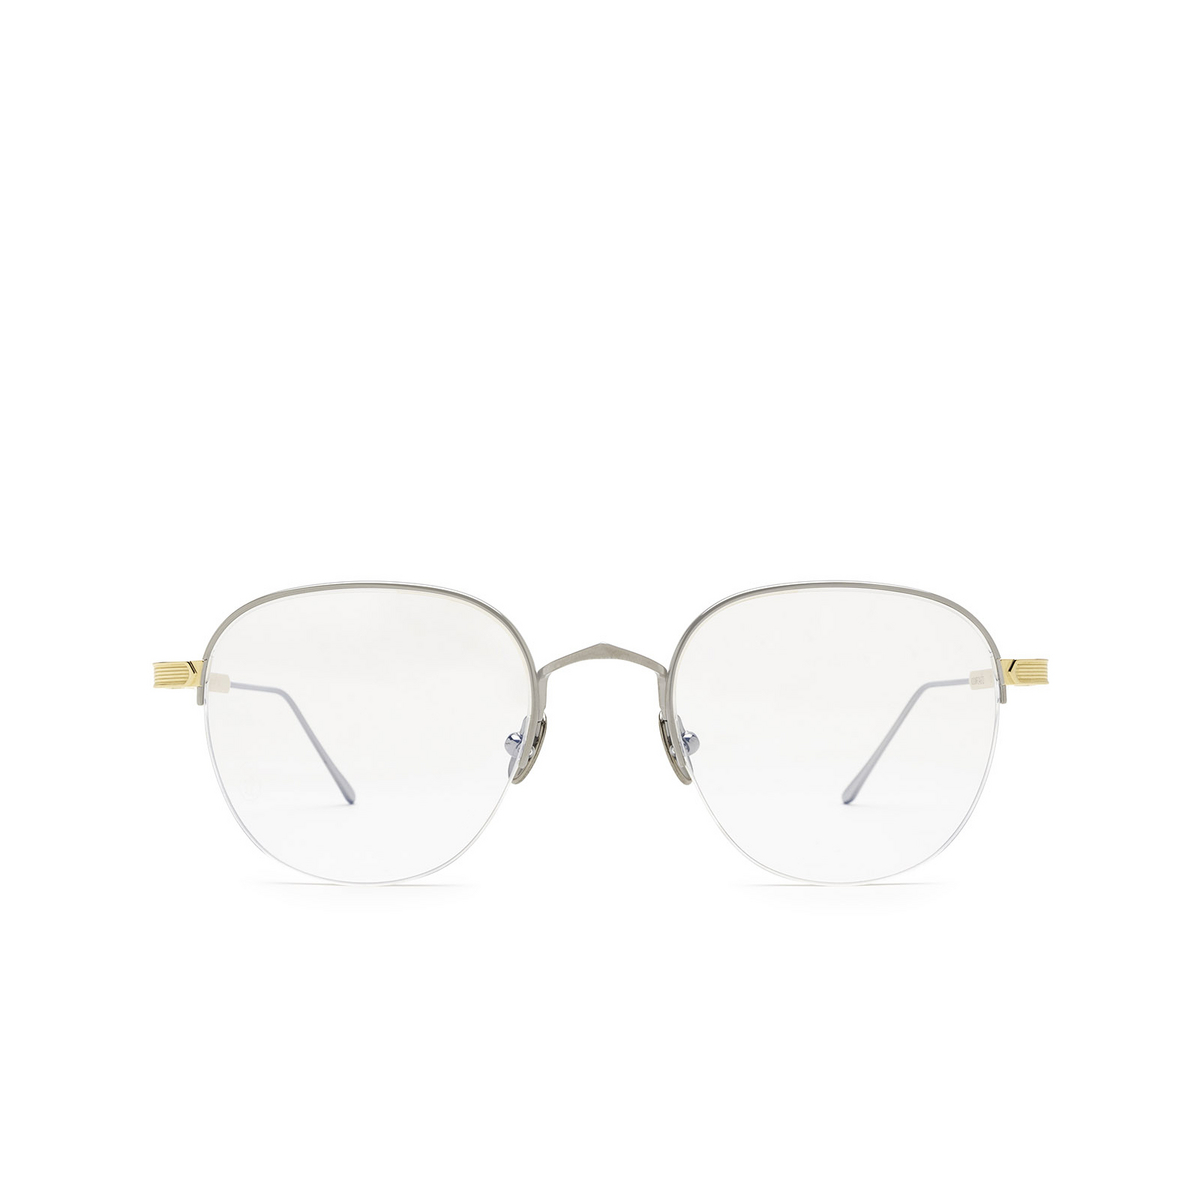 Cartier® Round Eyeglasses: CT0164O color Ruthenium & Gold 003 - front view.